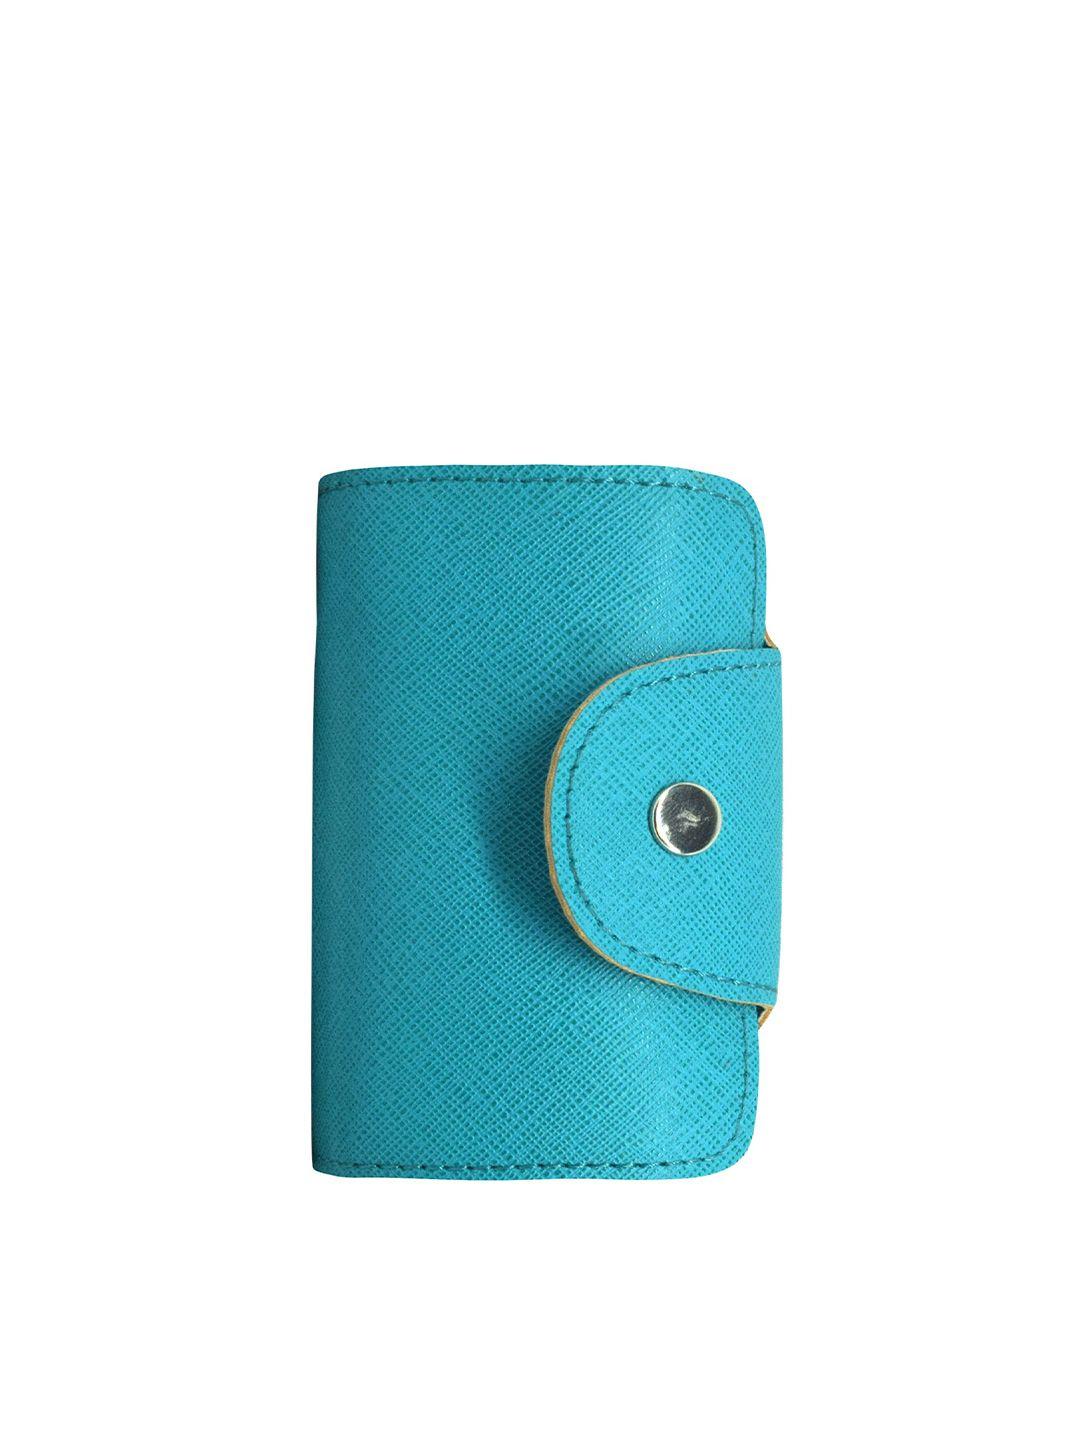 green dragonfly textured rfid protected card holder